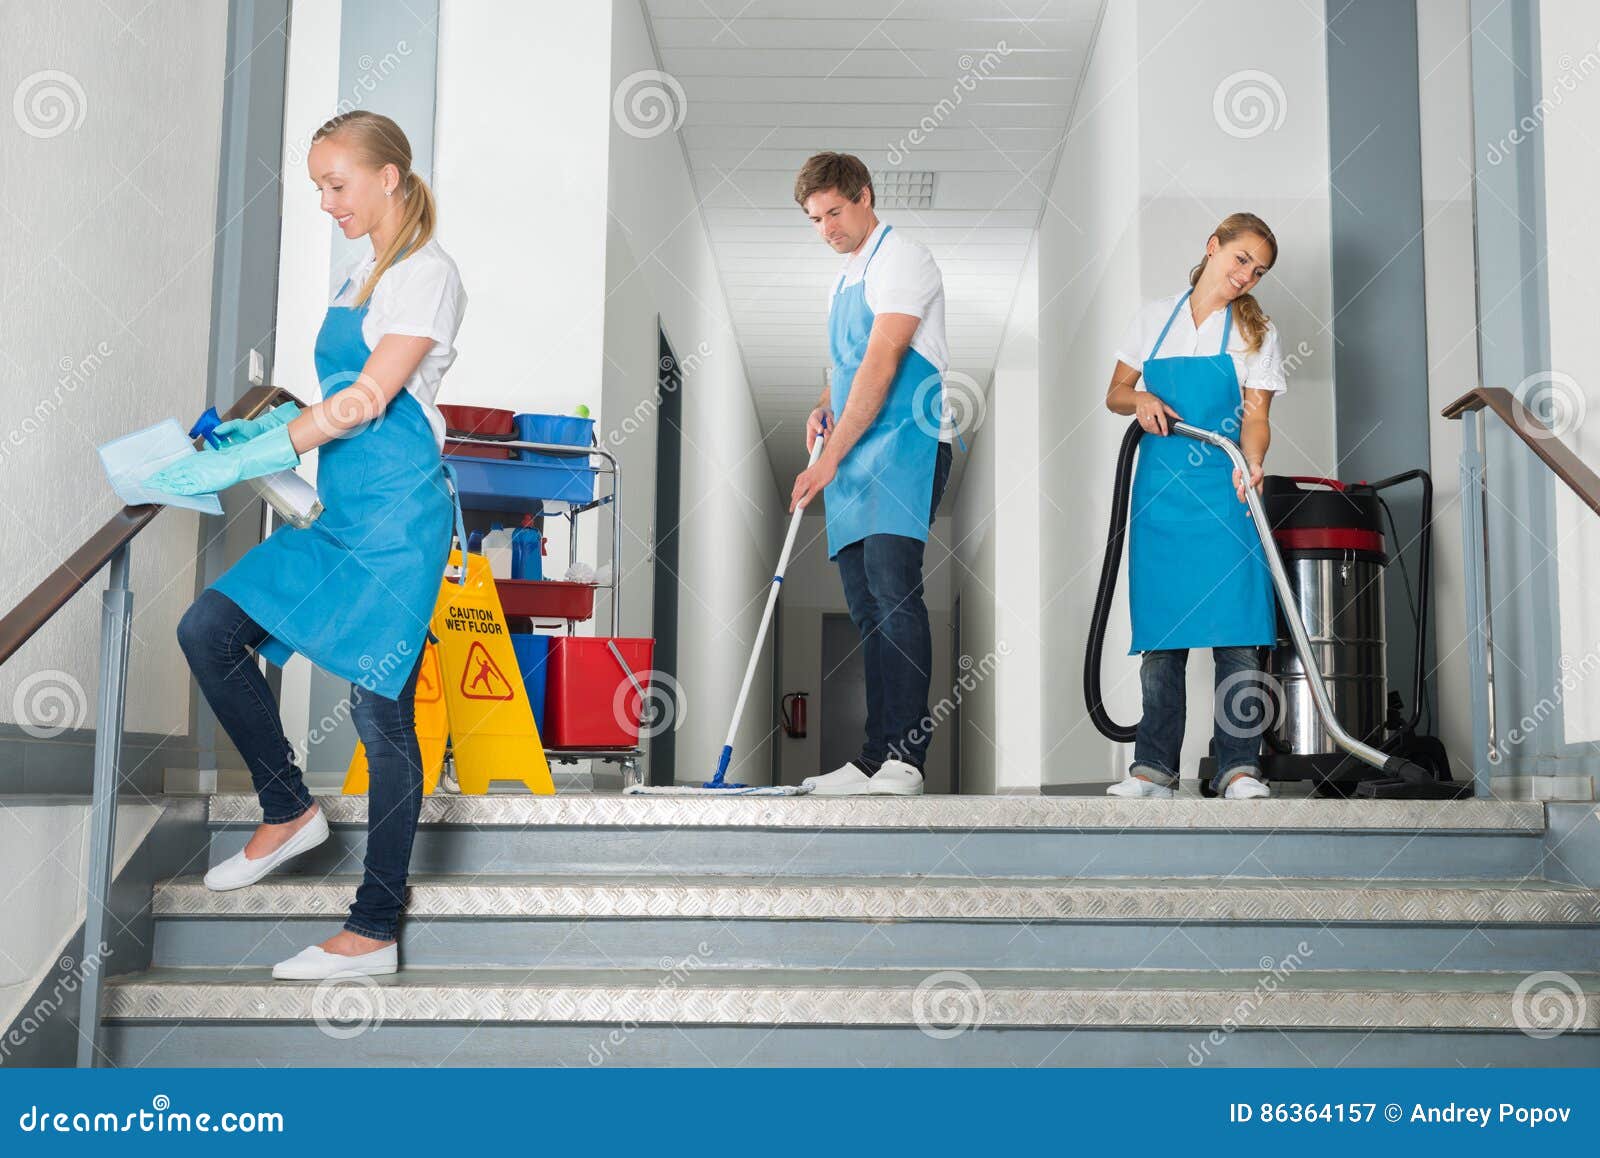 janitors cleaning corridor with cleaning equipments